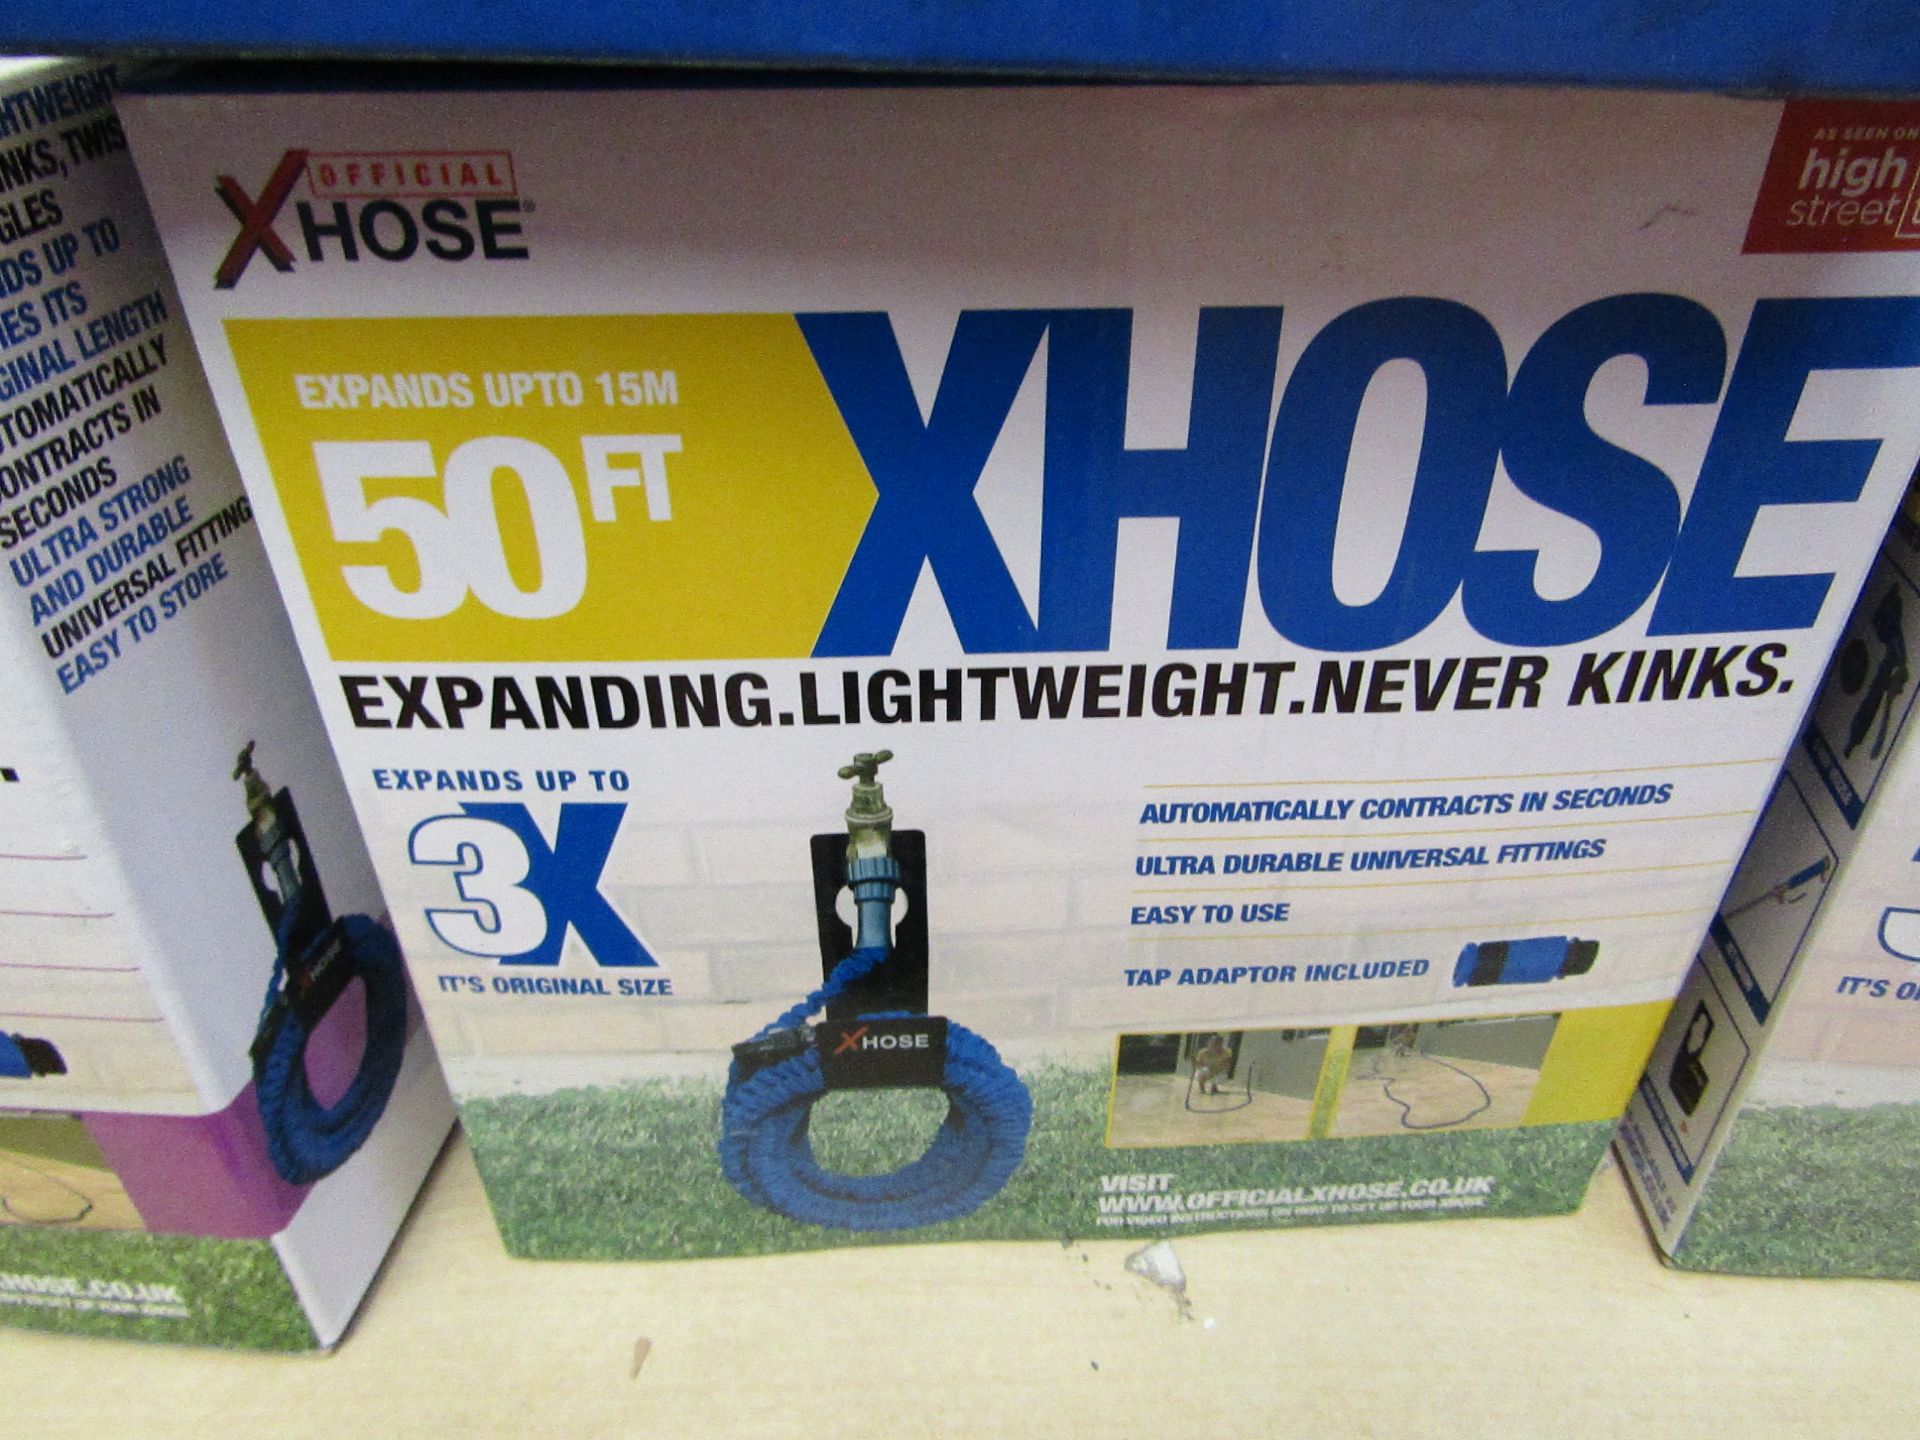 offical X Hose 50ft expandable hose, boxed (box may be damaged), item is unchecked, RRP £19.99 at